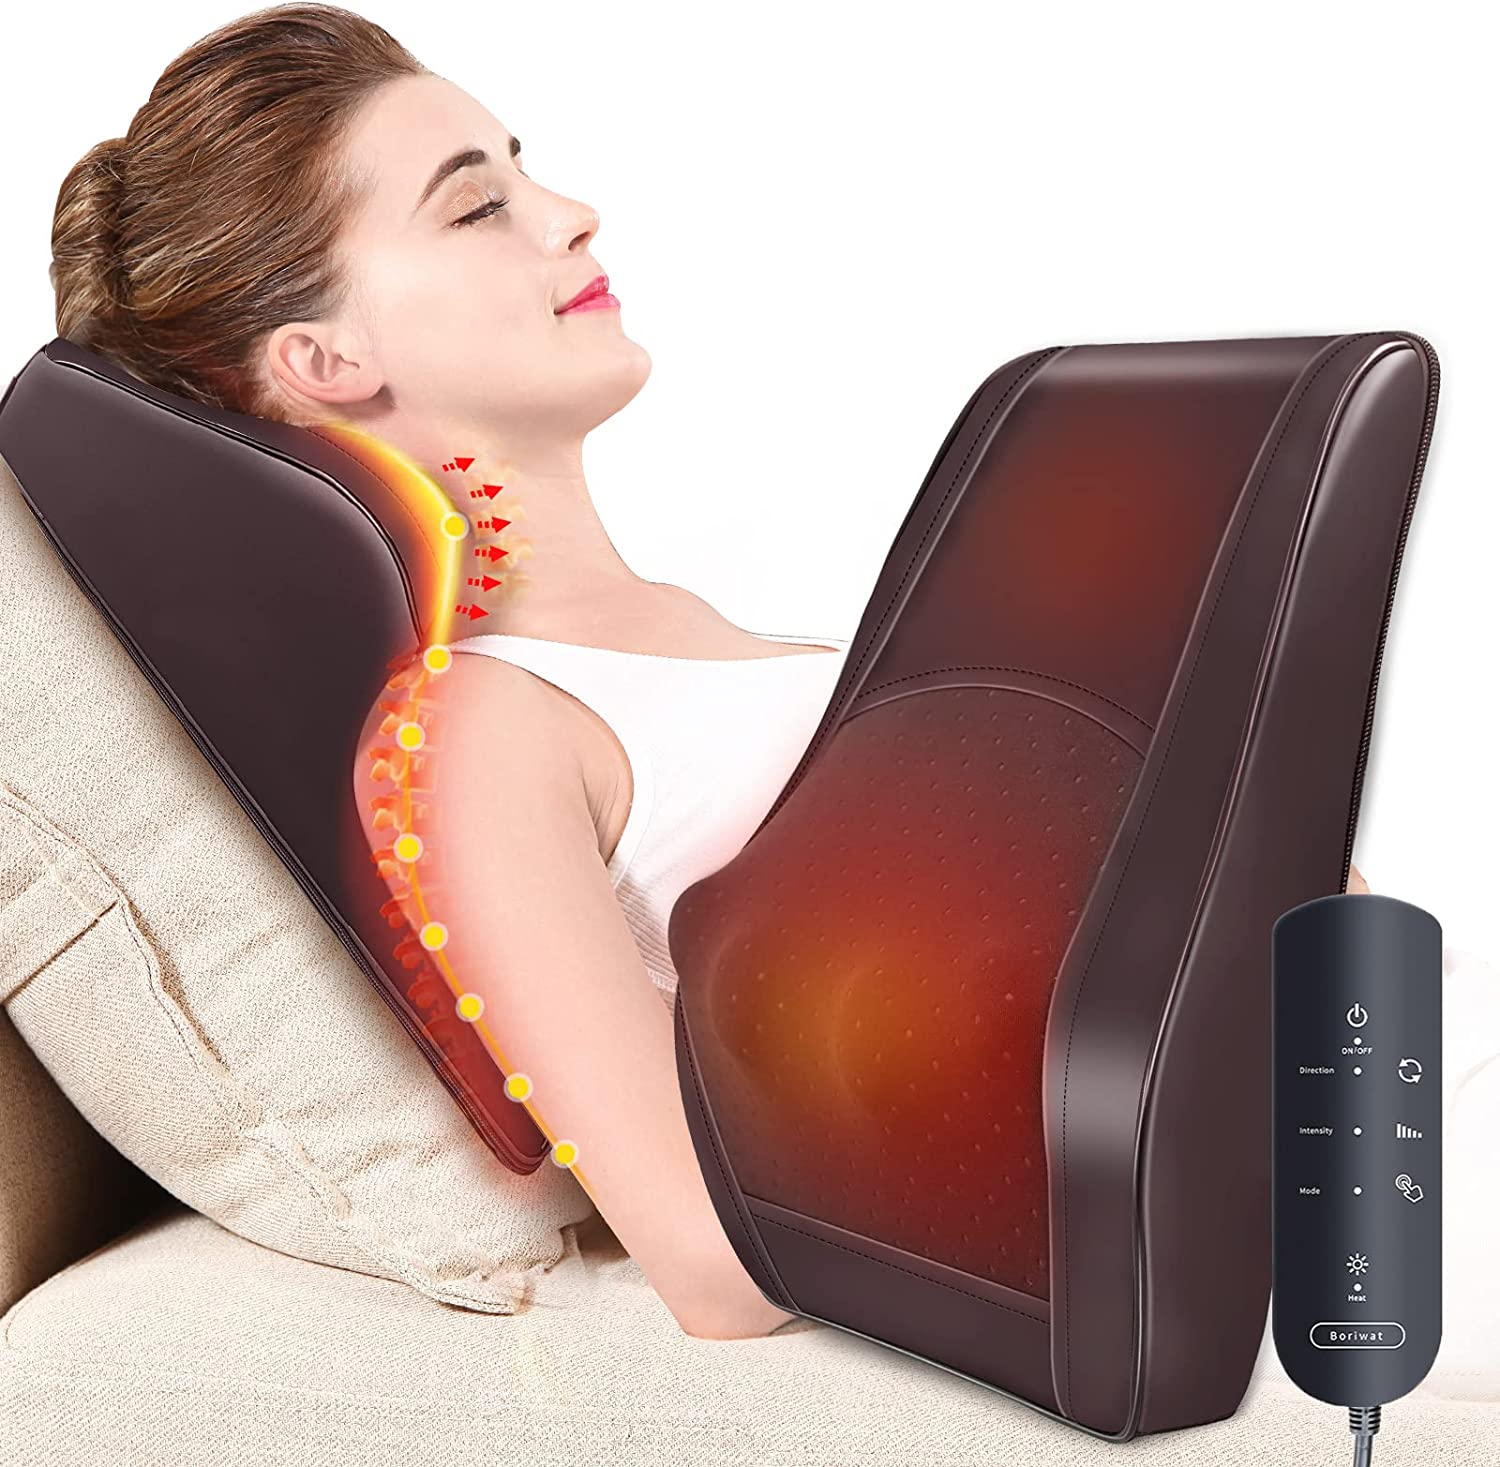  COMFIER Shiatsu Neck Back Massager with Heat, 2D ro 3D Kneading  Massage Chair Pad, Adjustable Compression Seat Massager for Full Body  Relaxation, Gifts for Women Men,Dark Gray : Health & Household